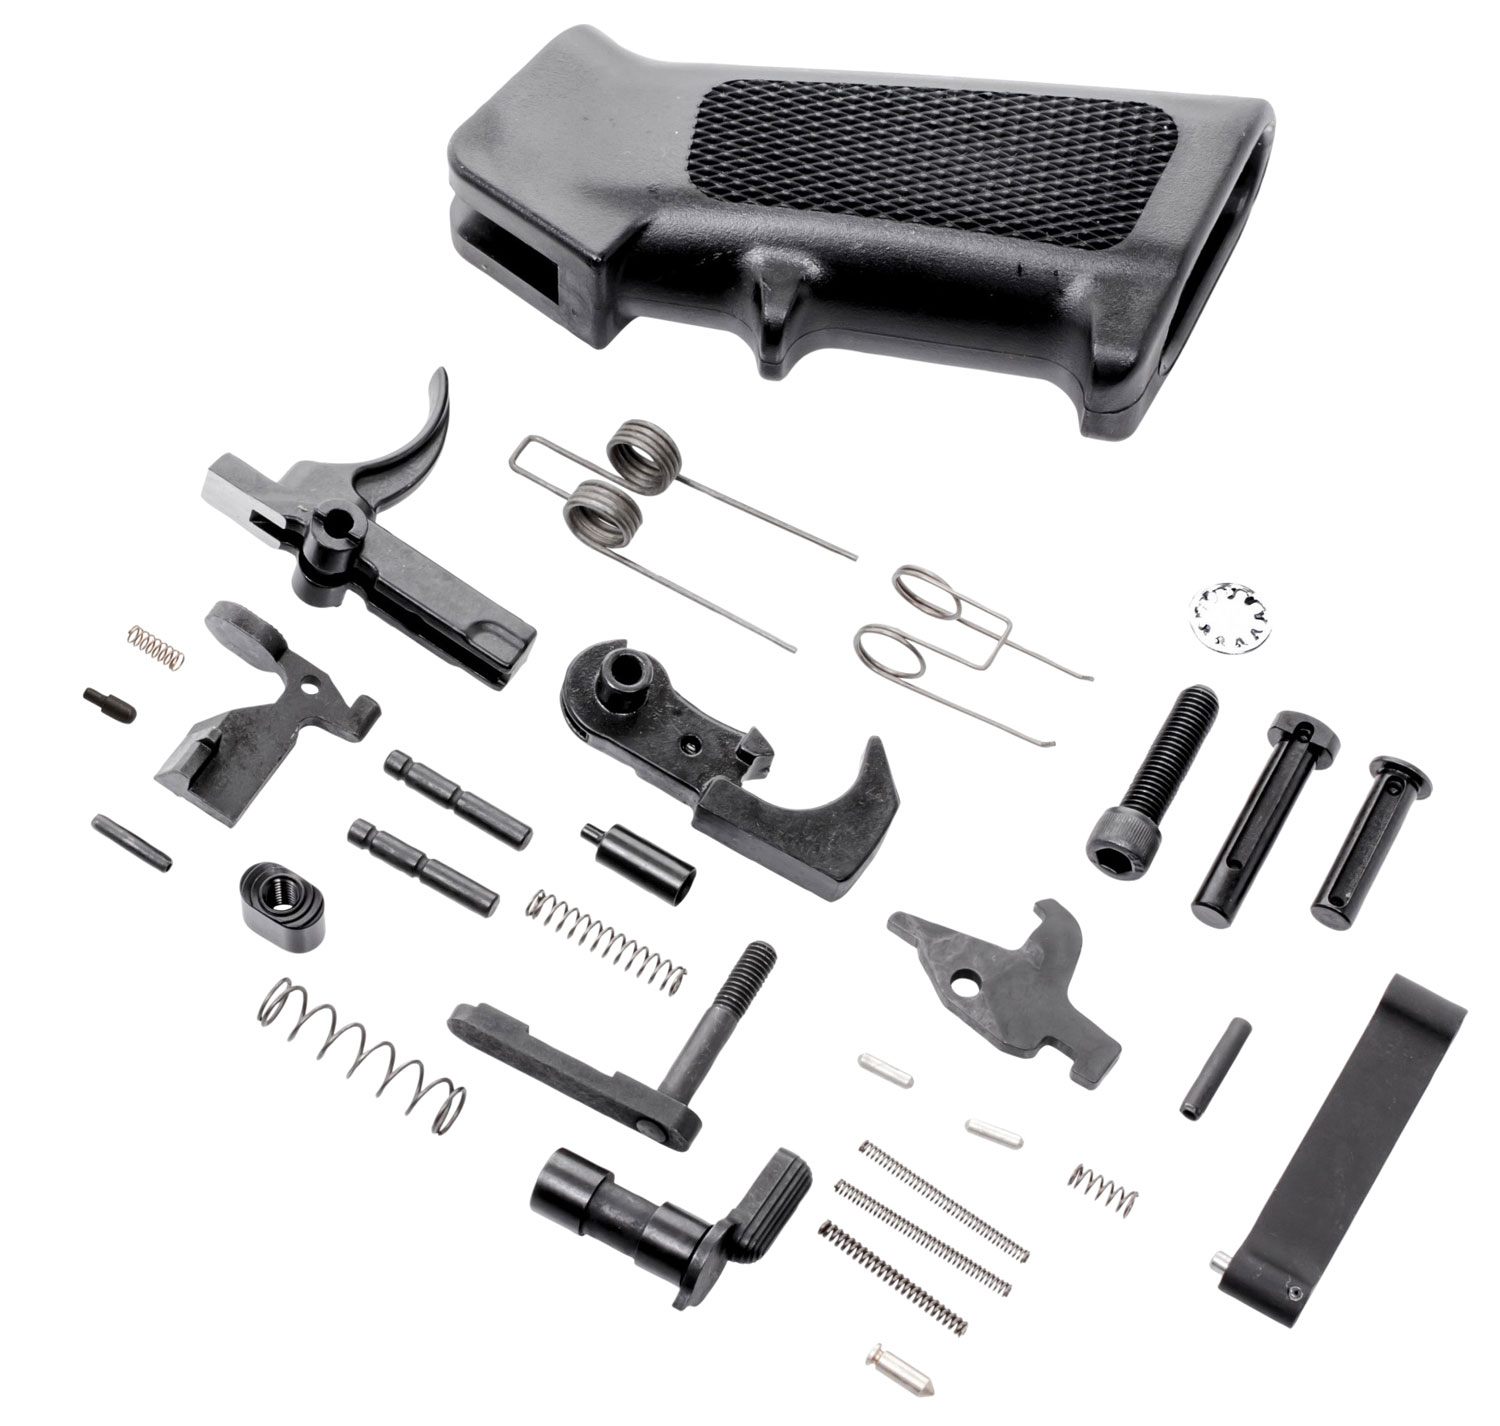 CMMG 55CA6B8 Lower Parts Kit  AR-15 Single-Stage Trigger Ambidextrous Lever Safety Black